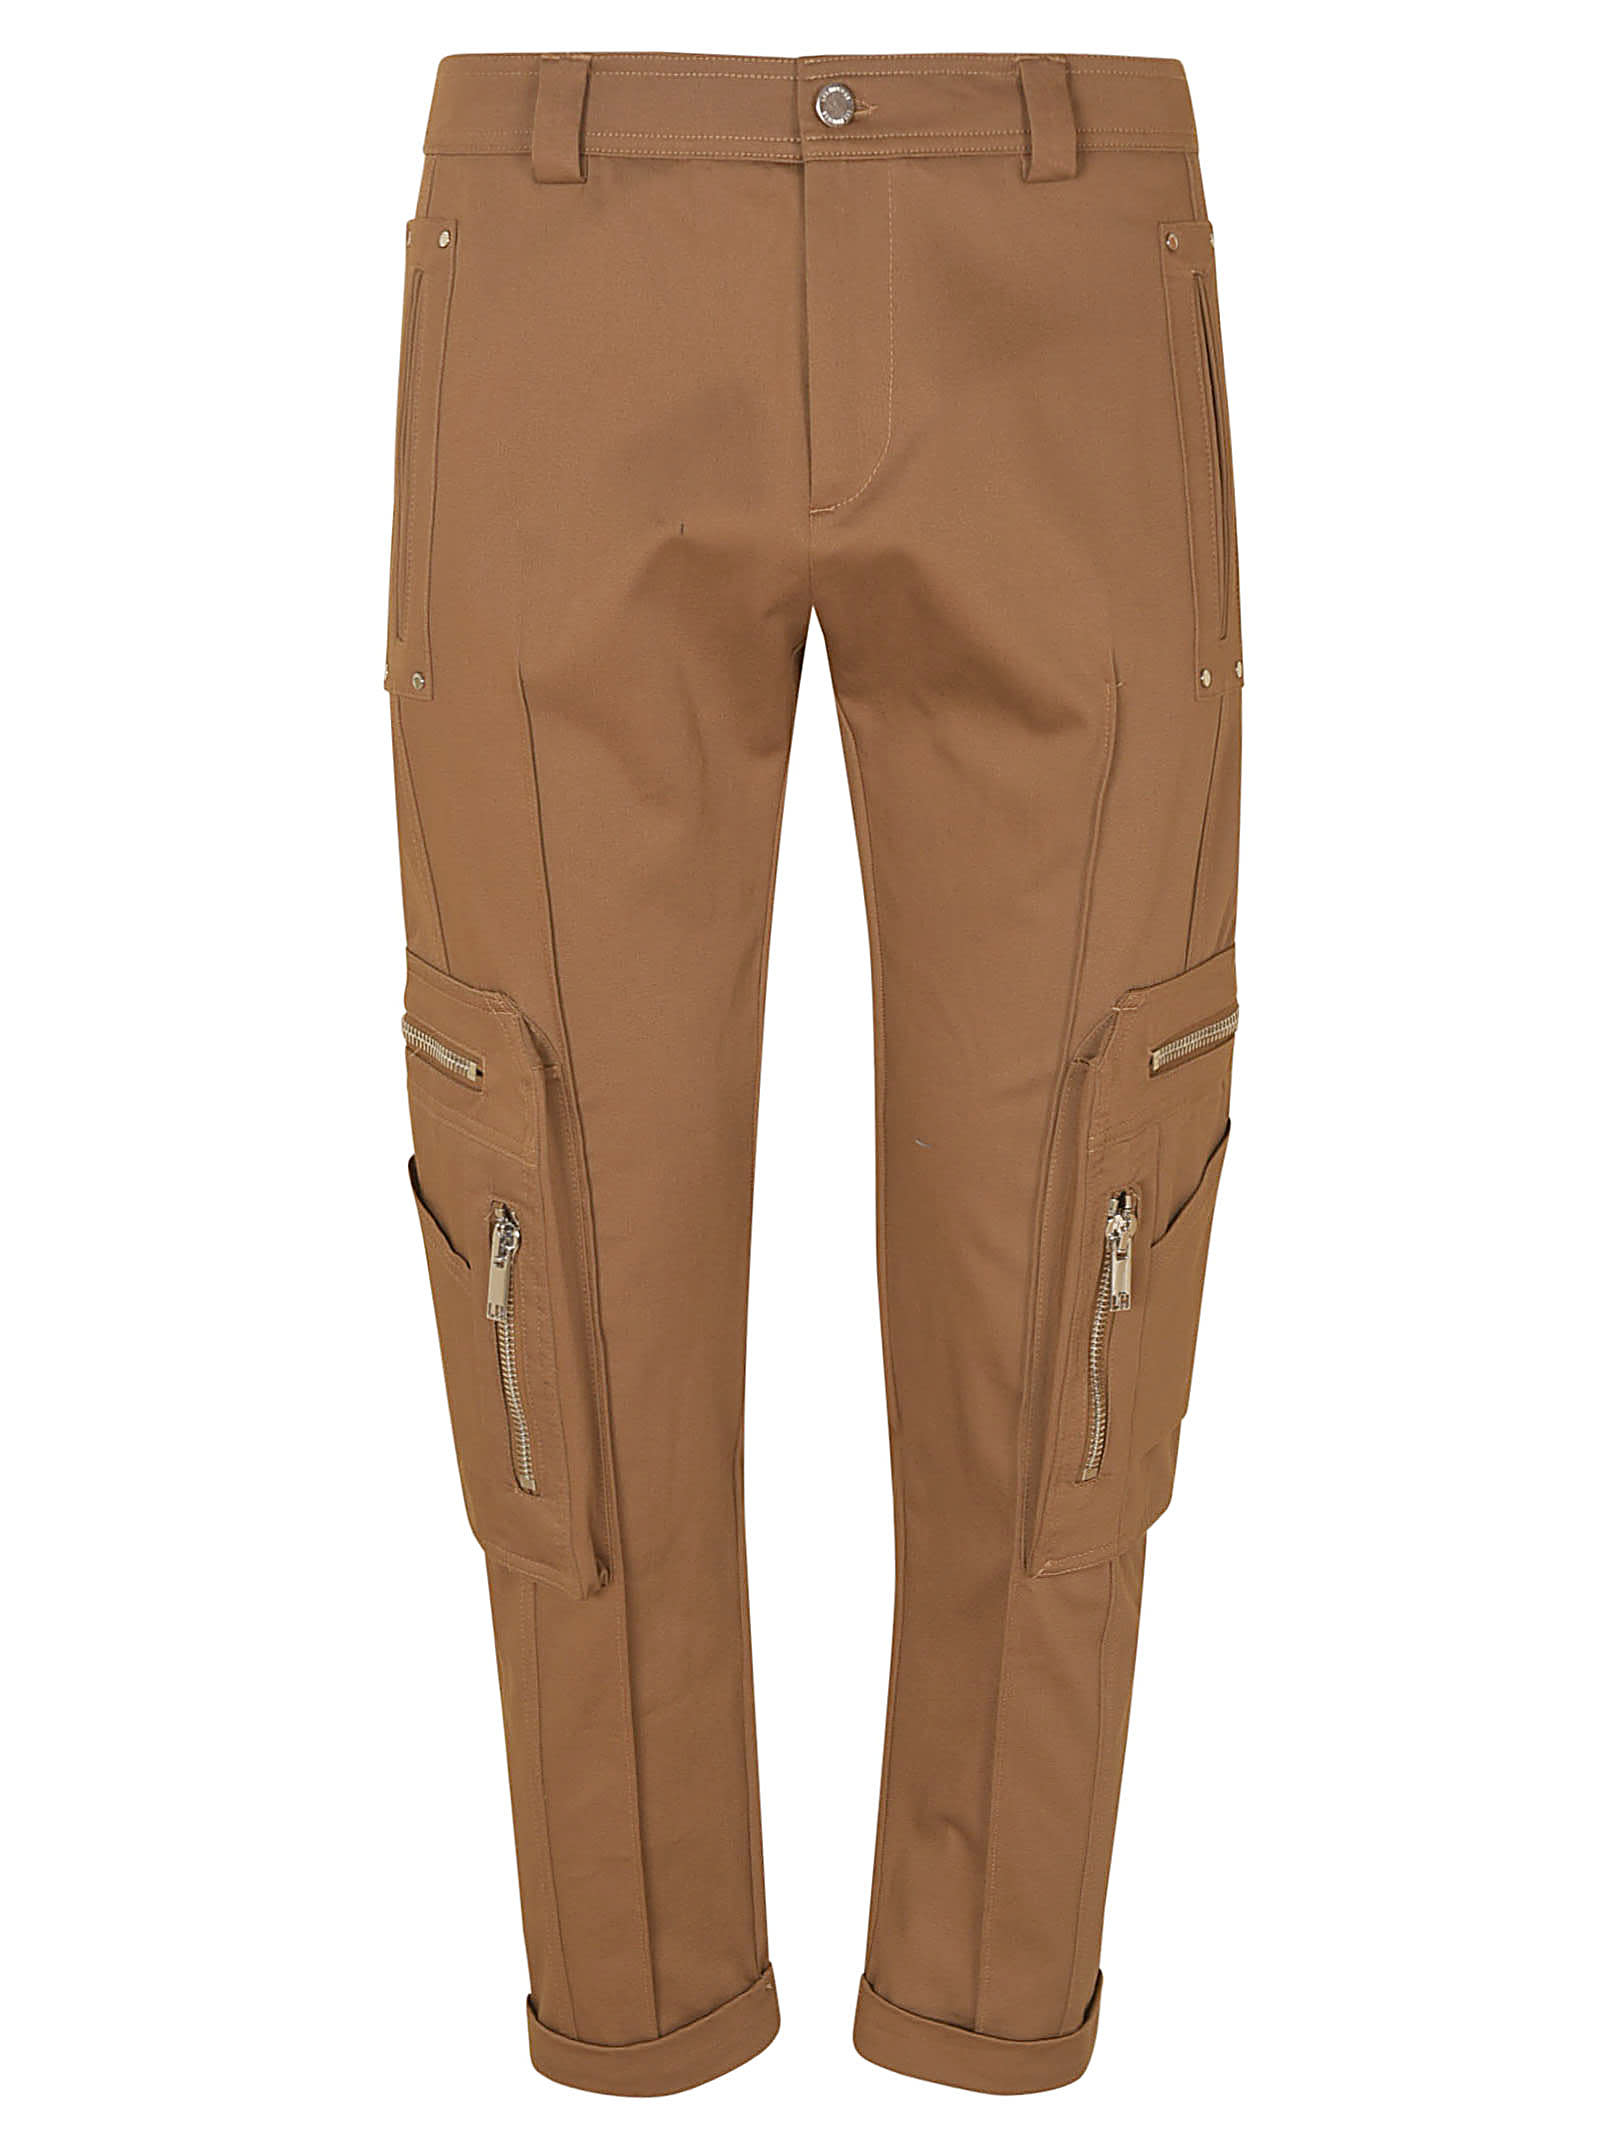 Les Hommes Cotton Twill Cargo Trousers